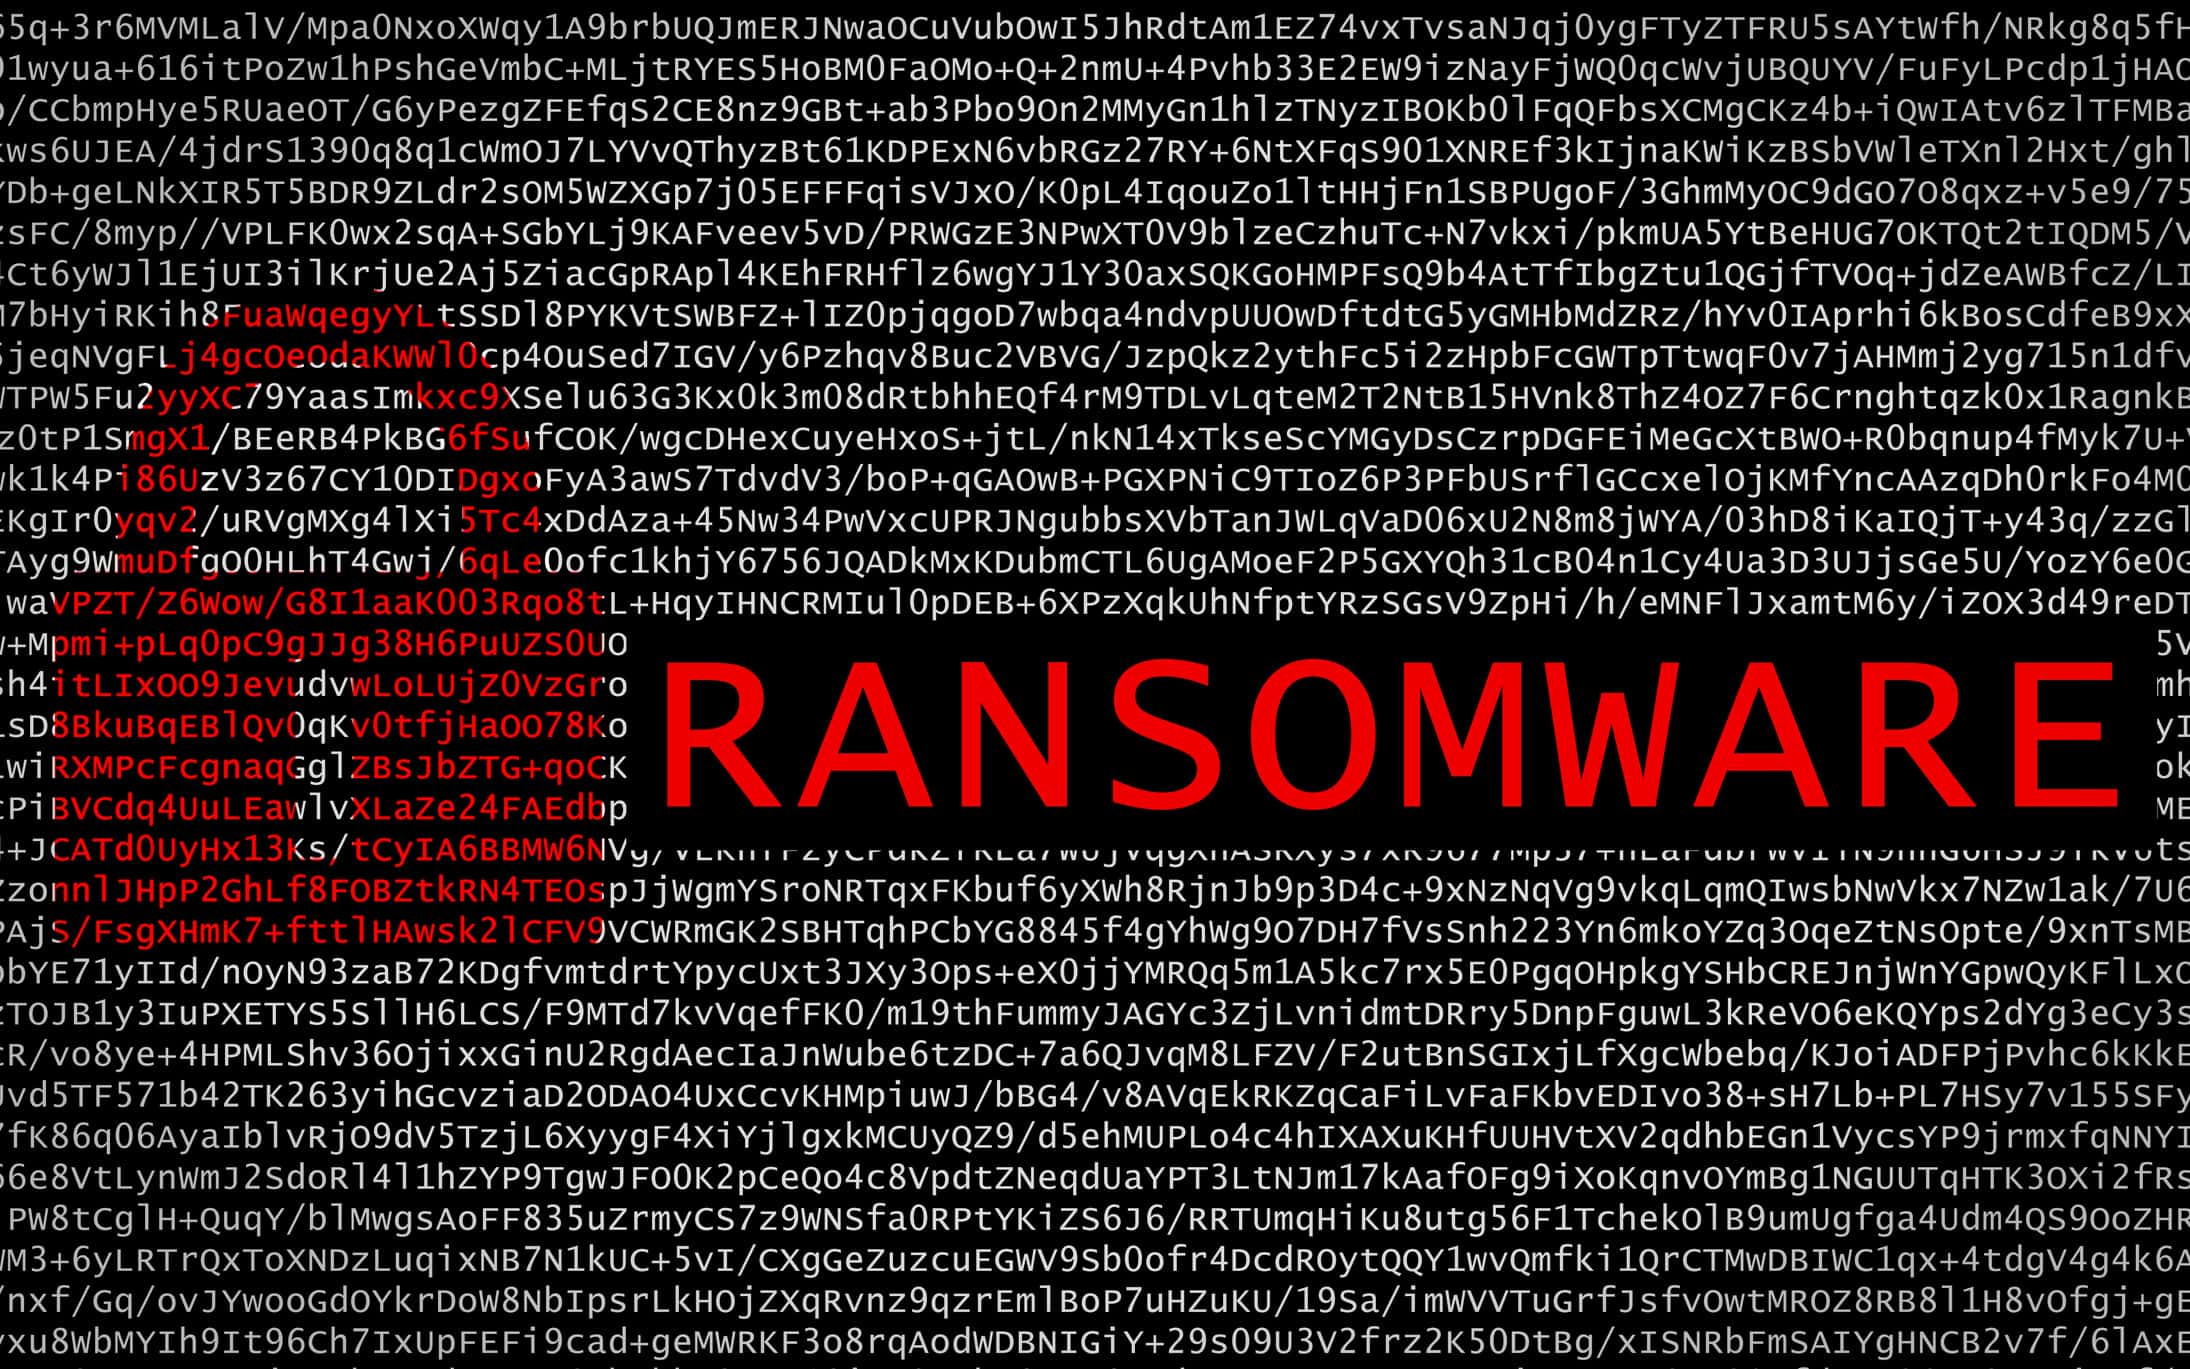 ransomware-text-with-red-lock-over-encrypted-text